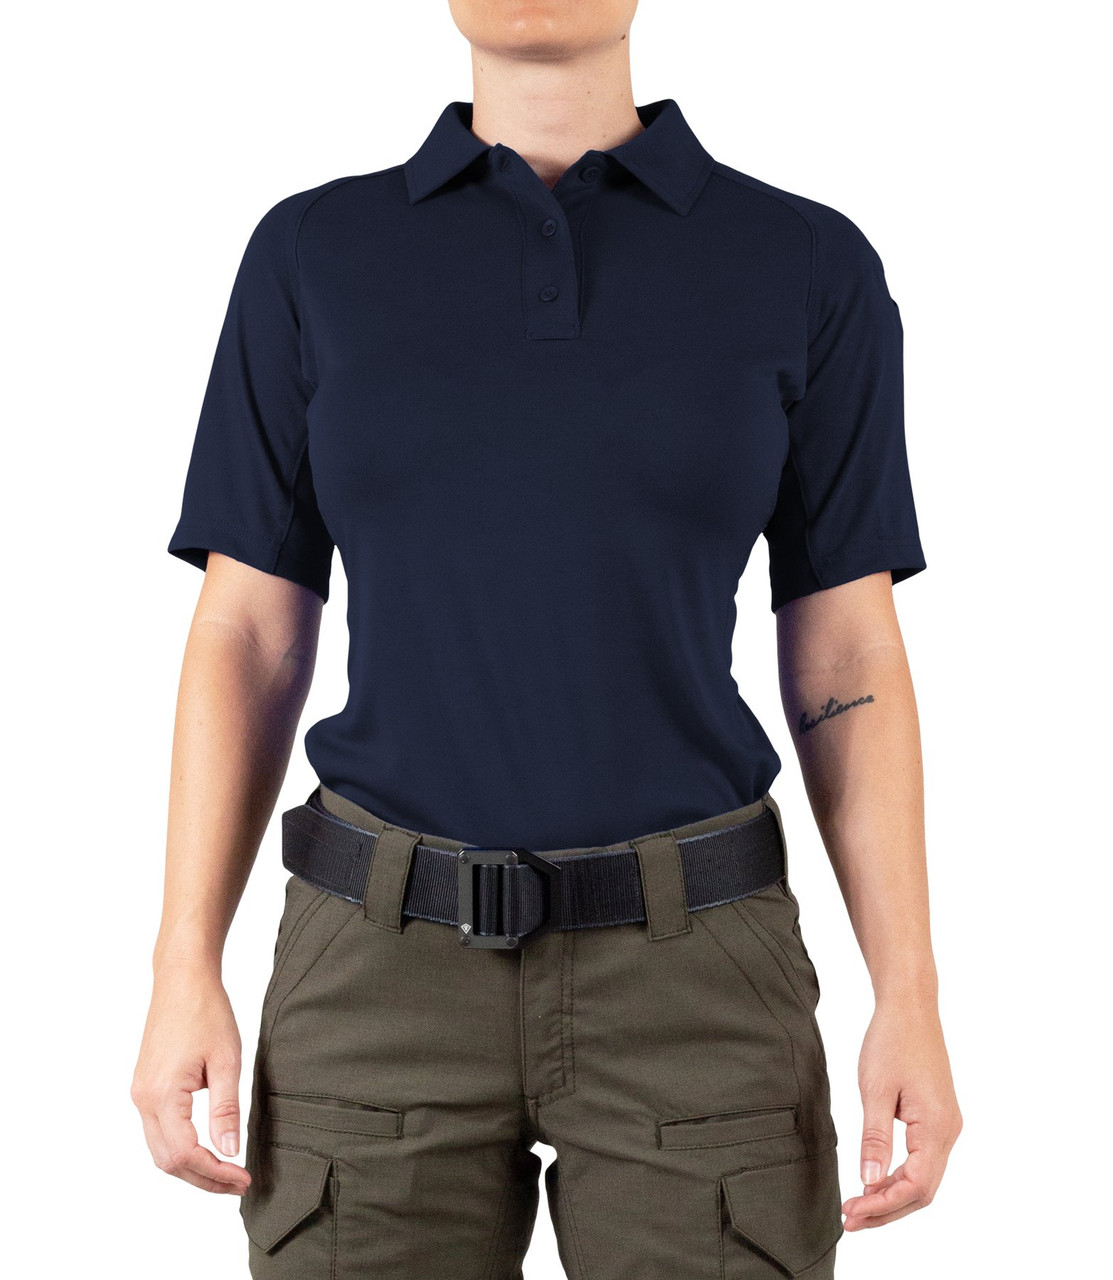 Women's Performance Short Sleeve Polo By First Tactical